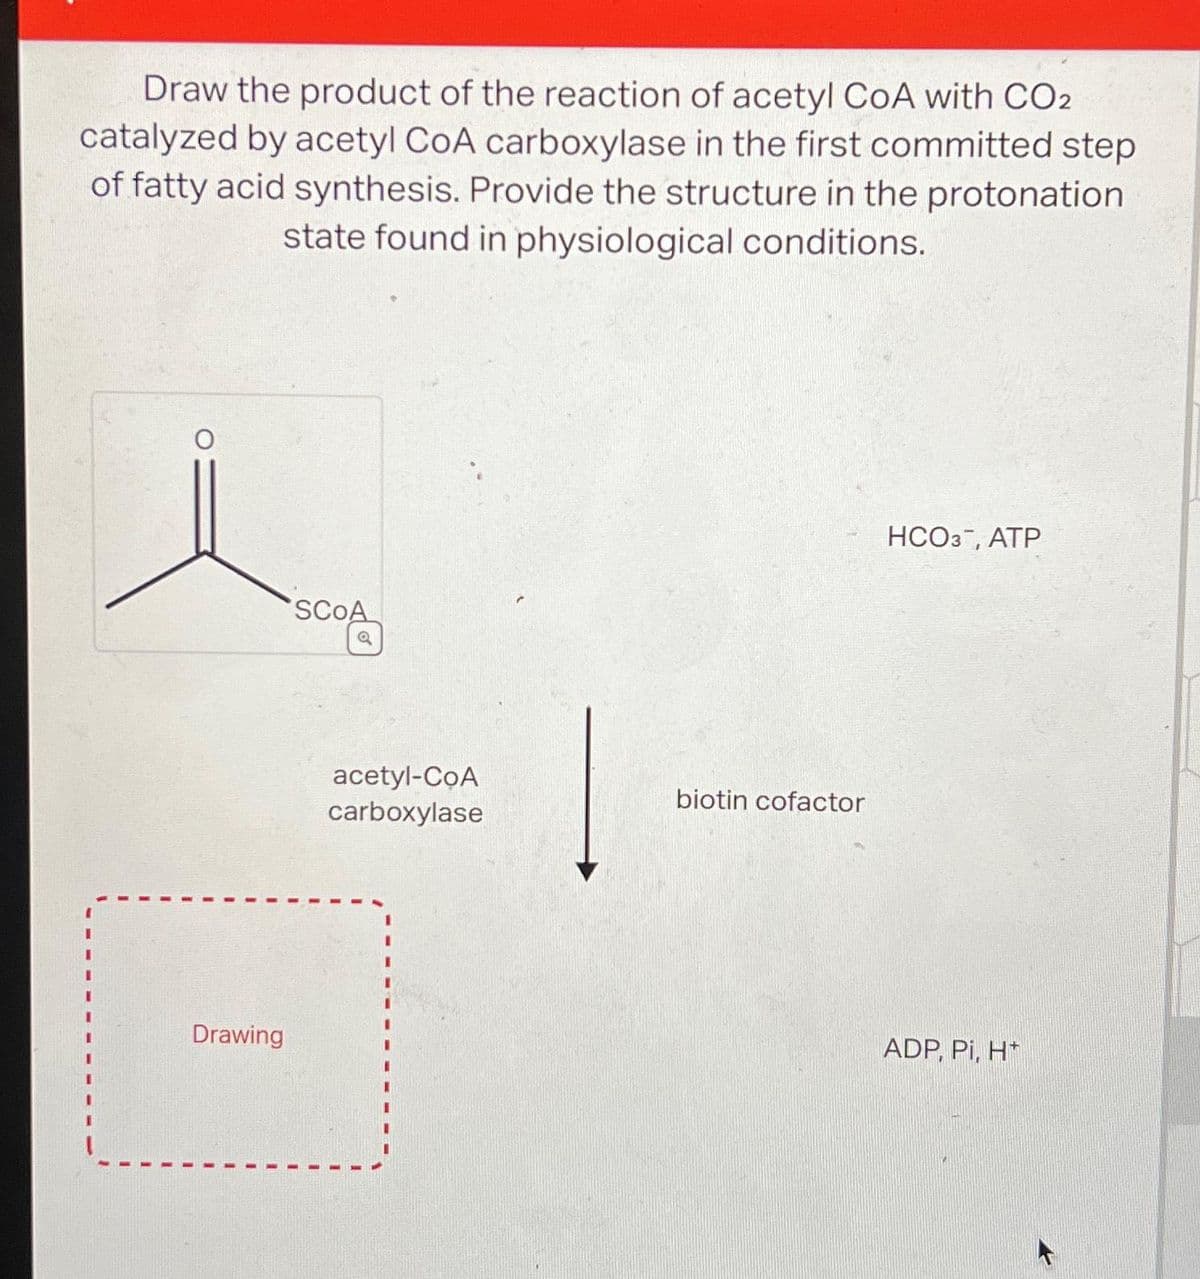 Draw the product of the reaction of acetyl CoA with CO2
catalyzed by acetyl CoA carboxylase in the first committed step
of fatty acid synthesis. Provide the structure in the protonation
state found in physiological conditions.
Drawing
SCOA
Q
acetyl-COA
carboxylase
biotin cofactor
HCO3, ATP
ADP, Pi, H*